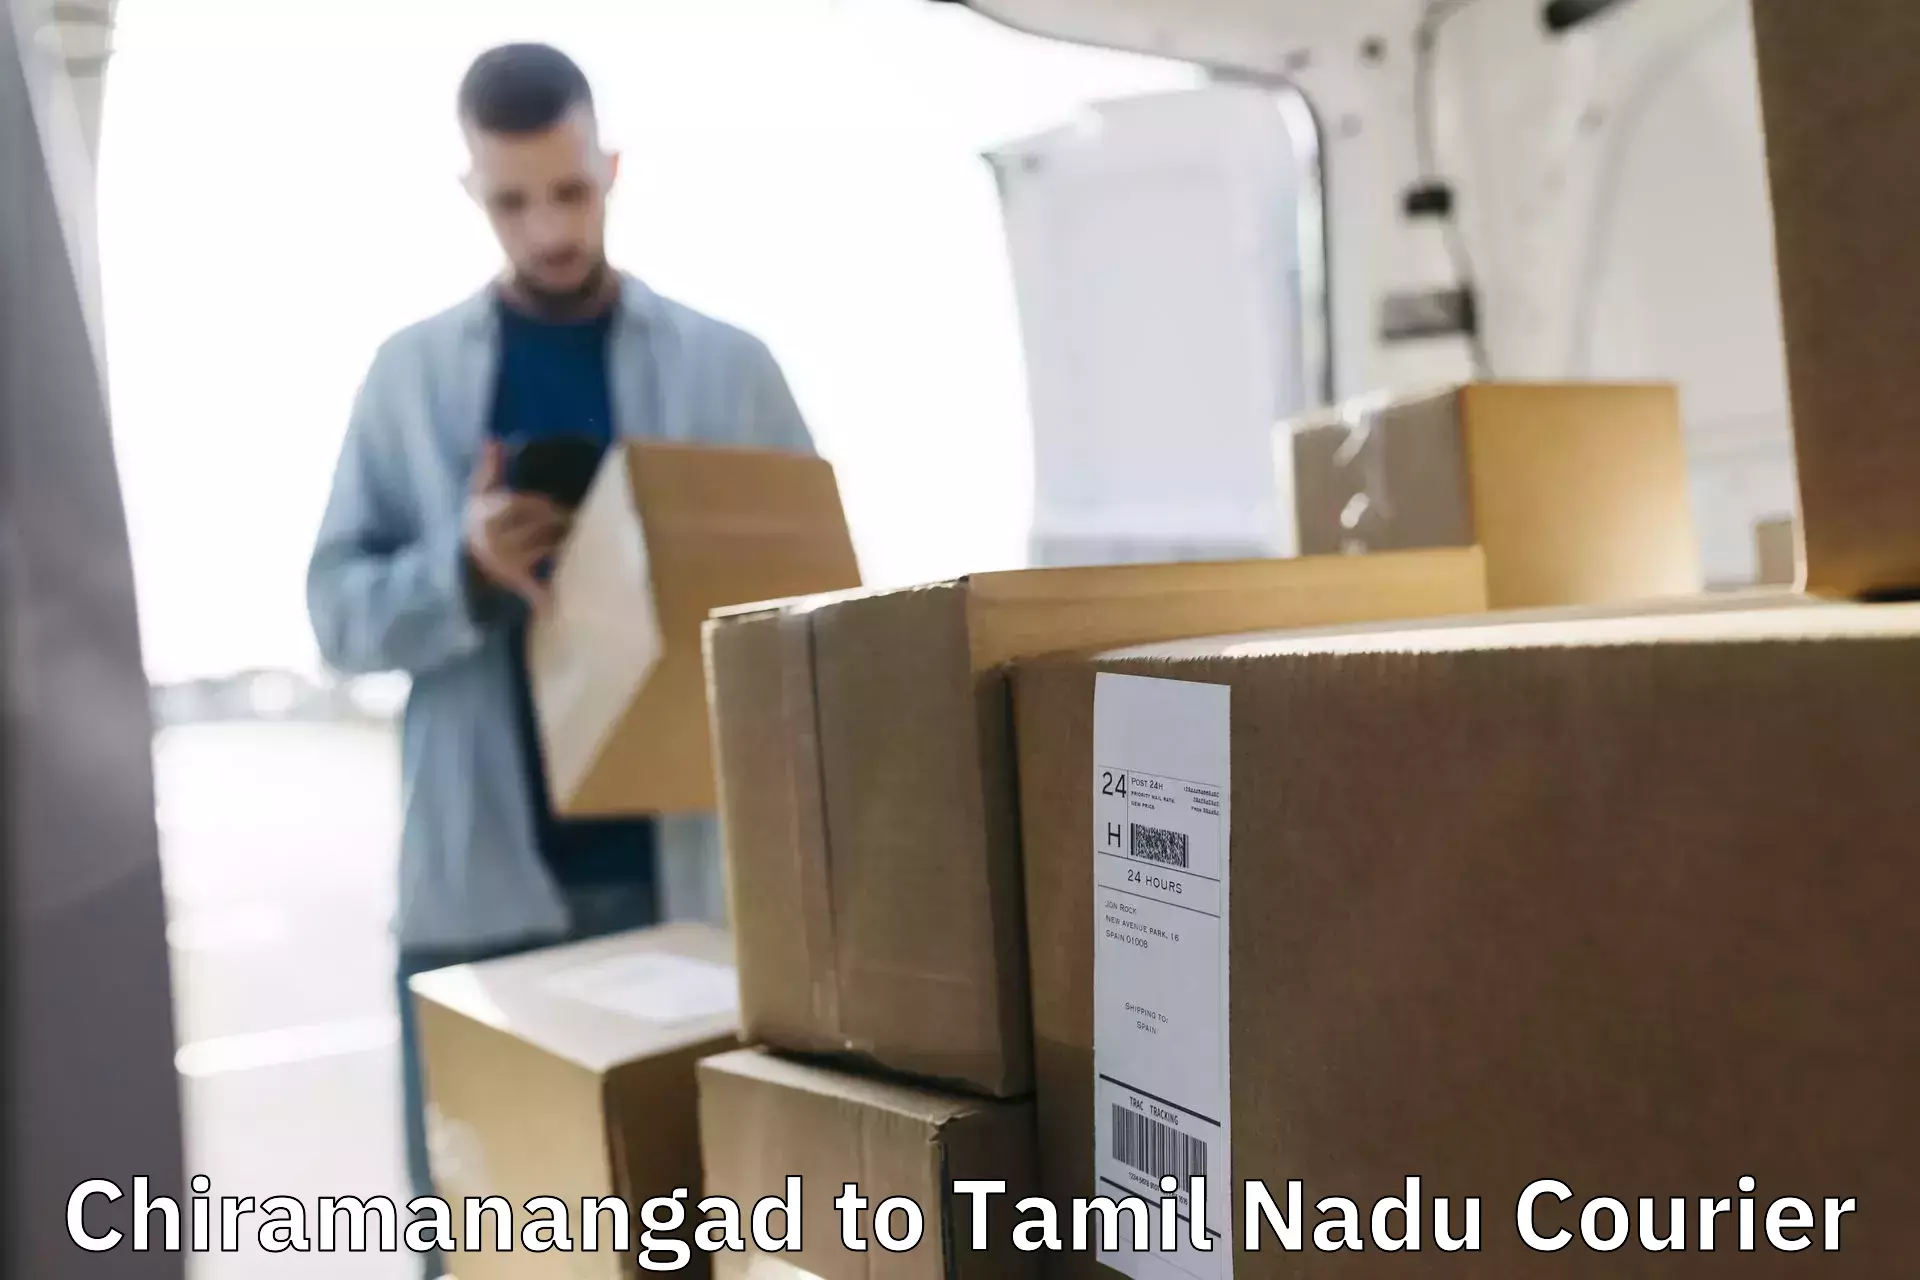 Expedited parcel delivery Chiramanangad to Tuticorin Port